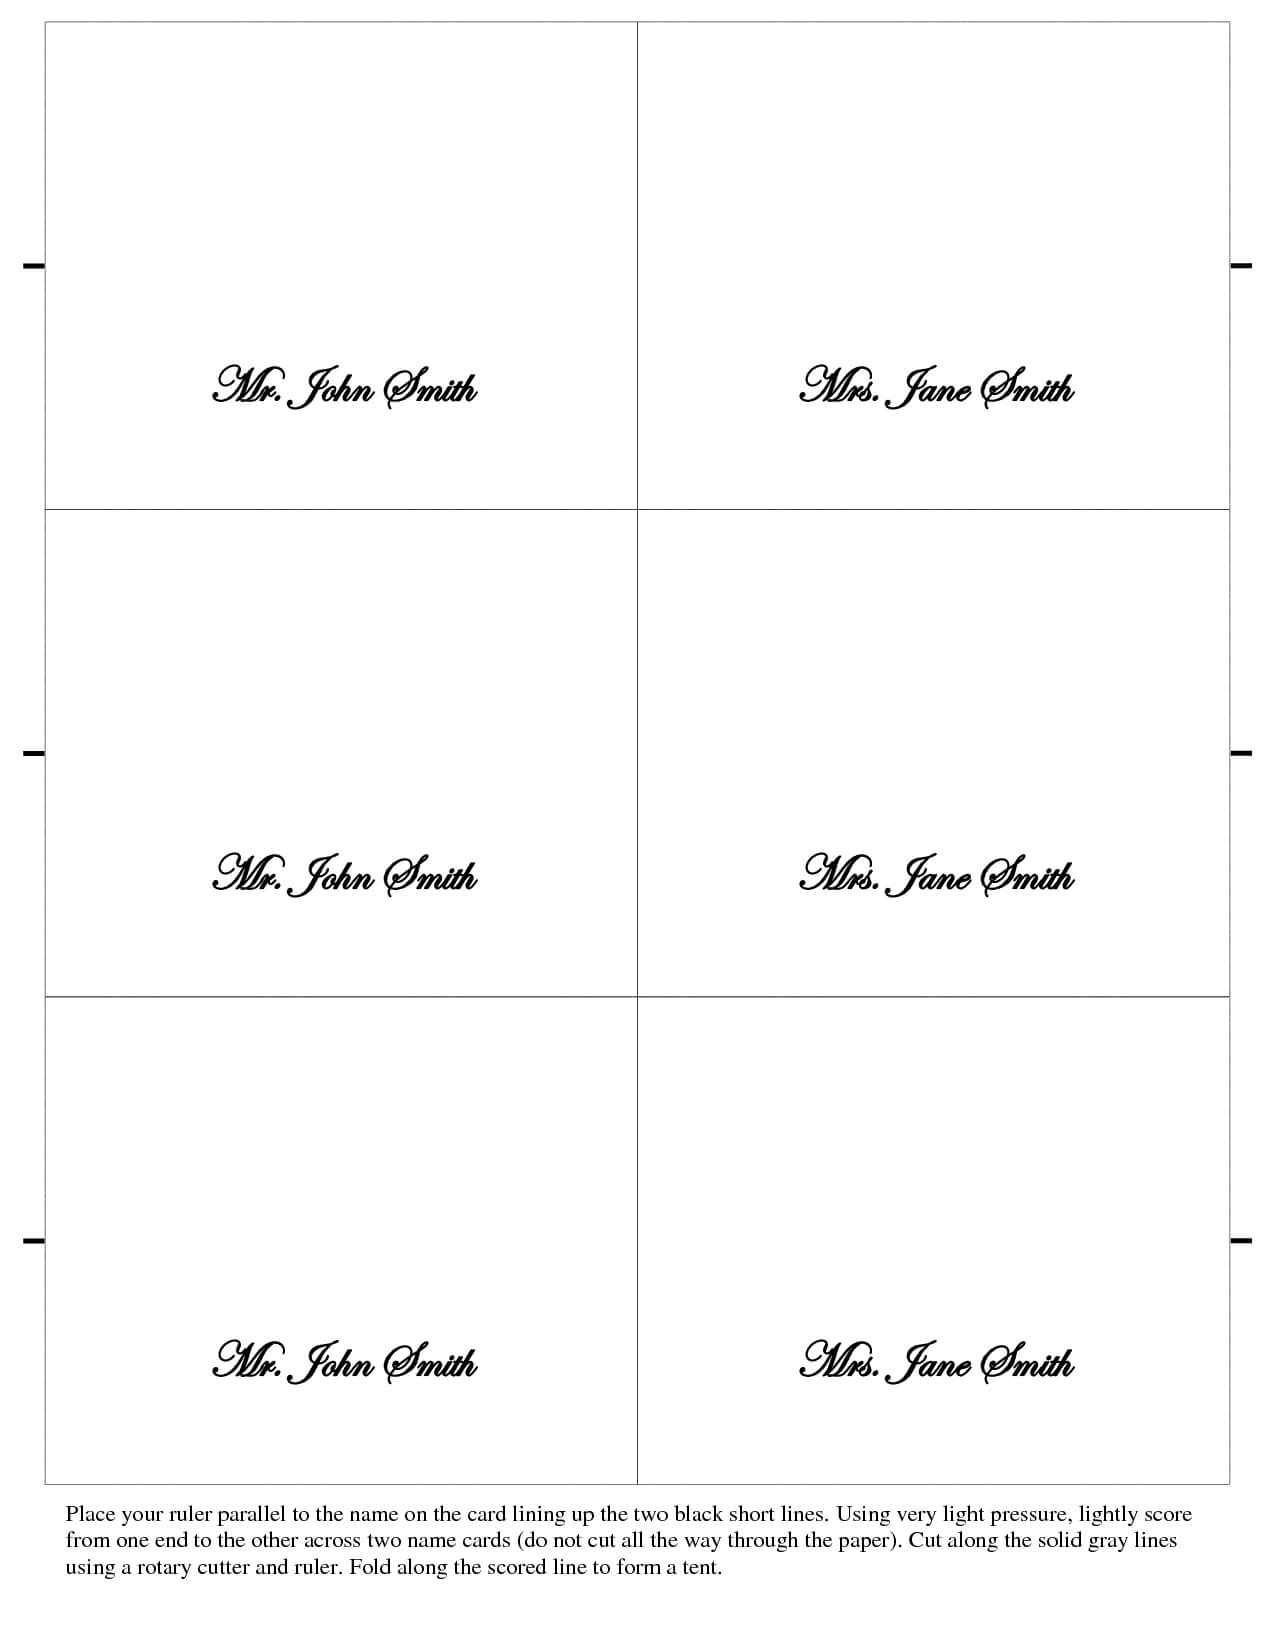 003 Free Place Card Template Ideas Table Mwd108673 Vert Regarding Microsoft Word Place Card Template